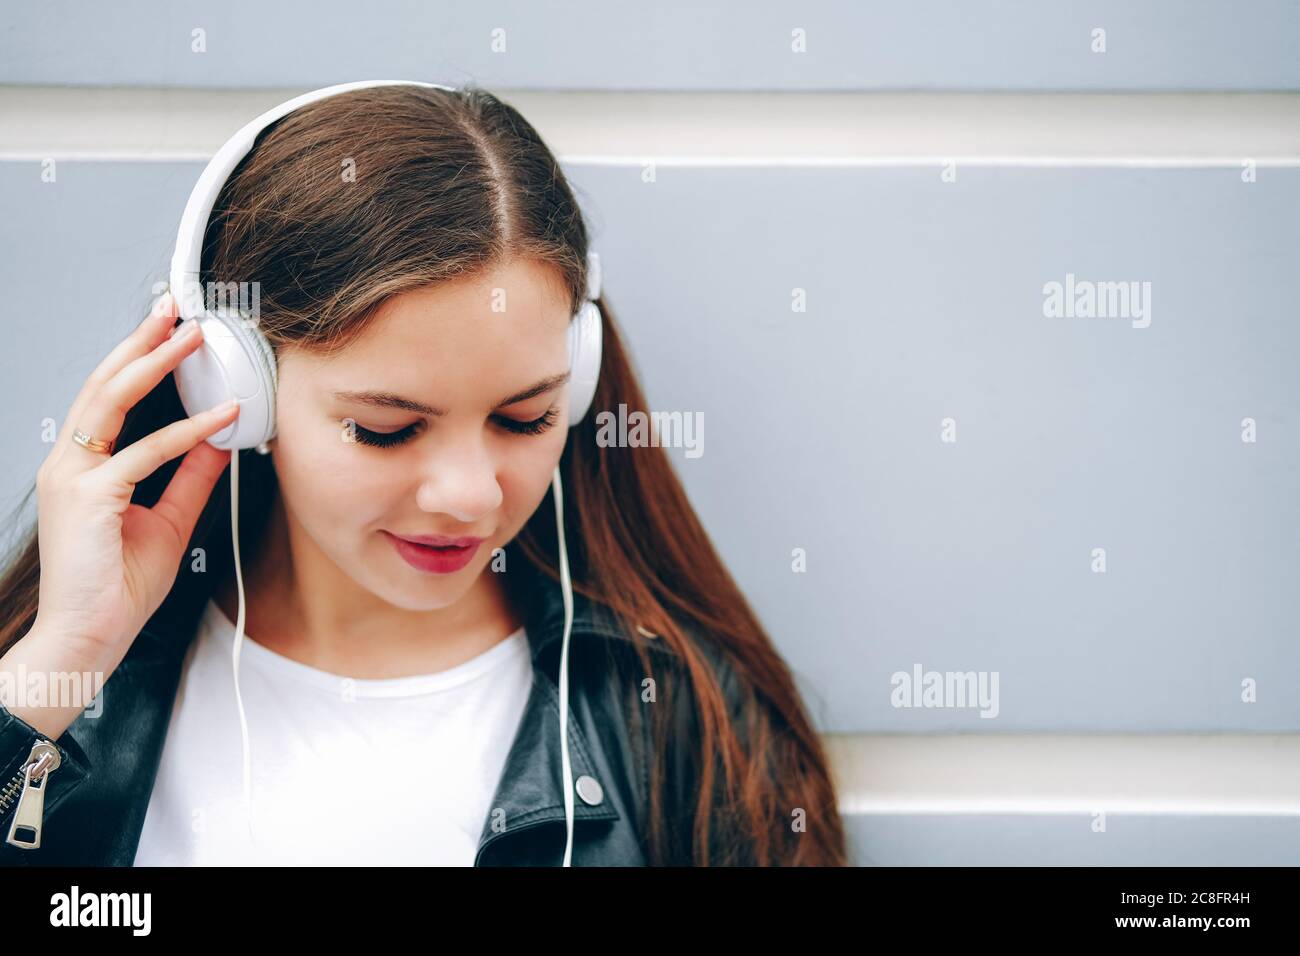 Young woman with long hair listening music in white headphones outside. Girl in the city. Space for text. Stock Photo